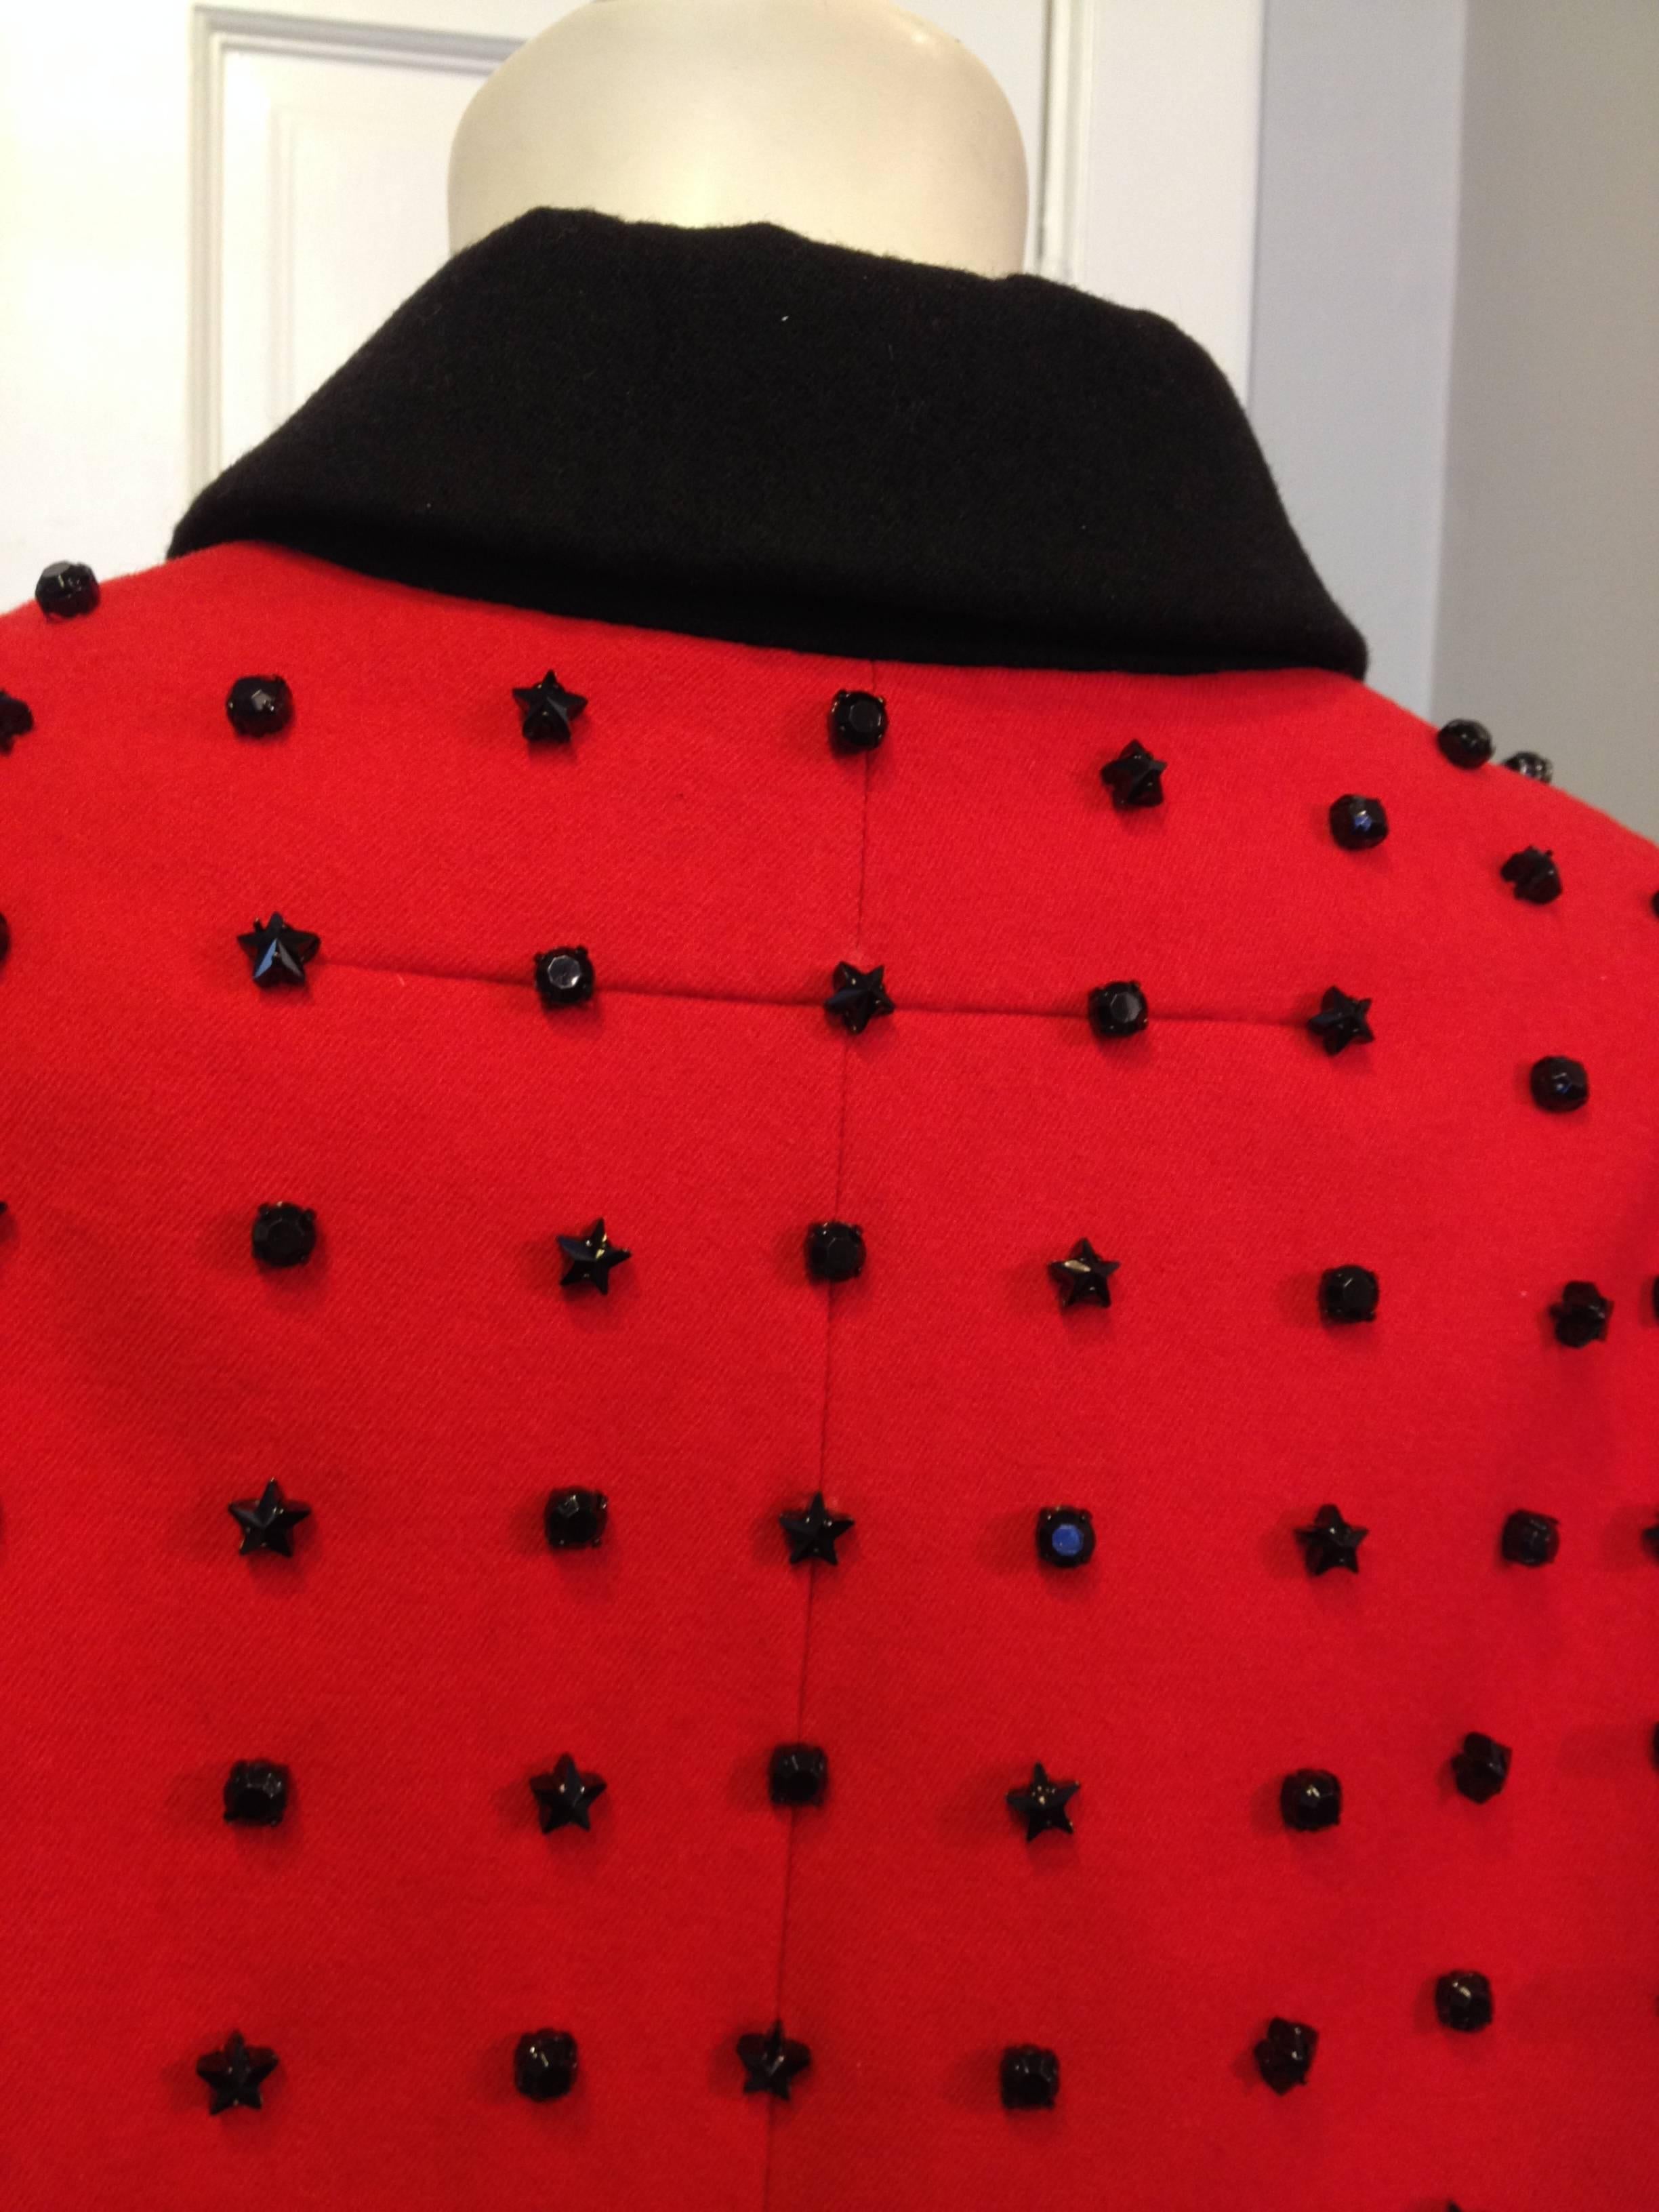 Givenchy Red Runway Jacket Black Star Embellishment Fall-Winter 2012-2013 Sz 38 For Sale 2